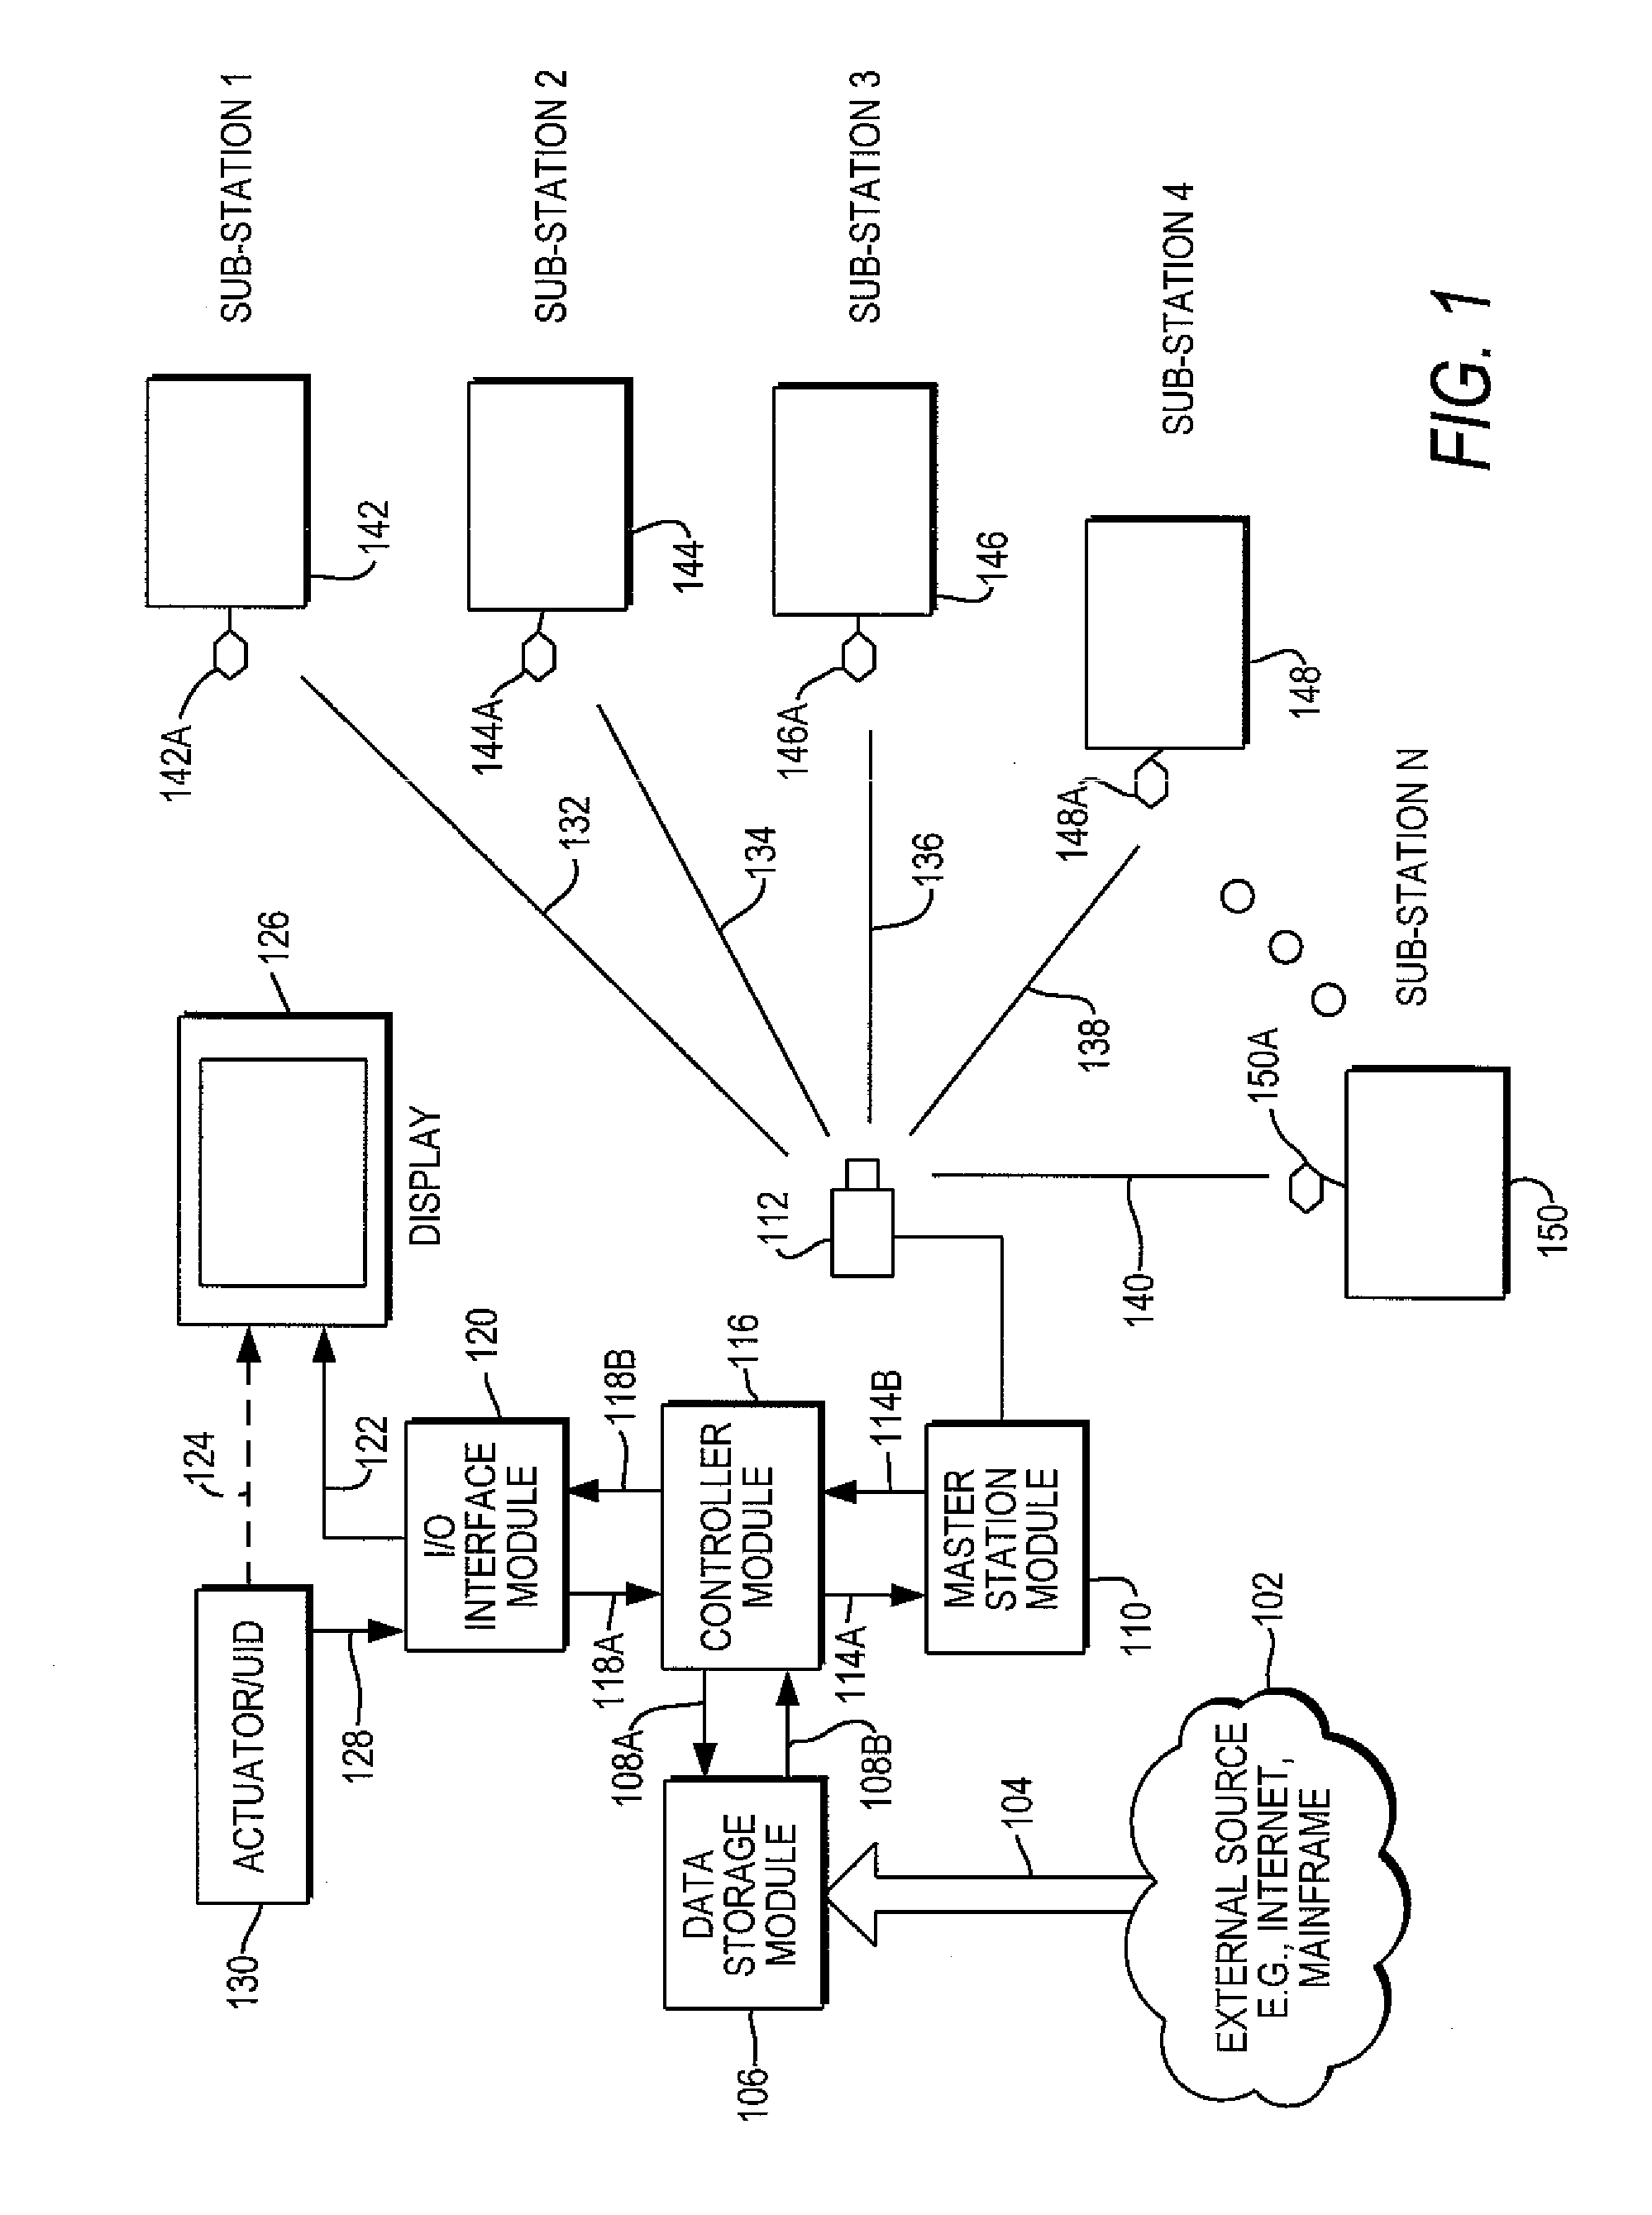 System and method capable of navigating and/or mapping any multi-dimensional space